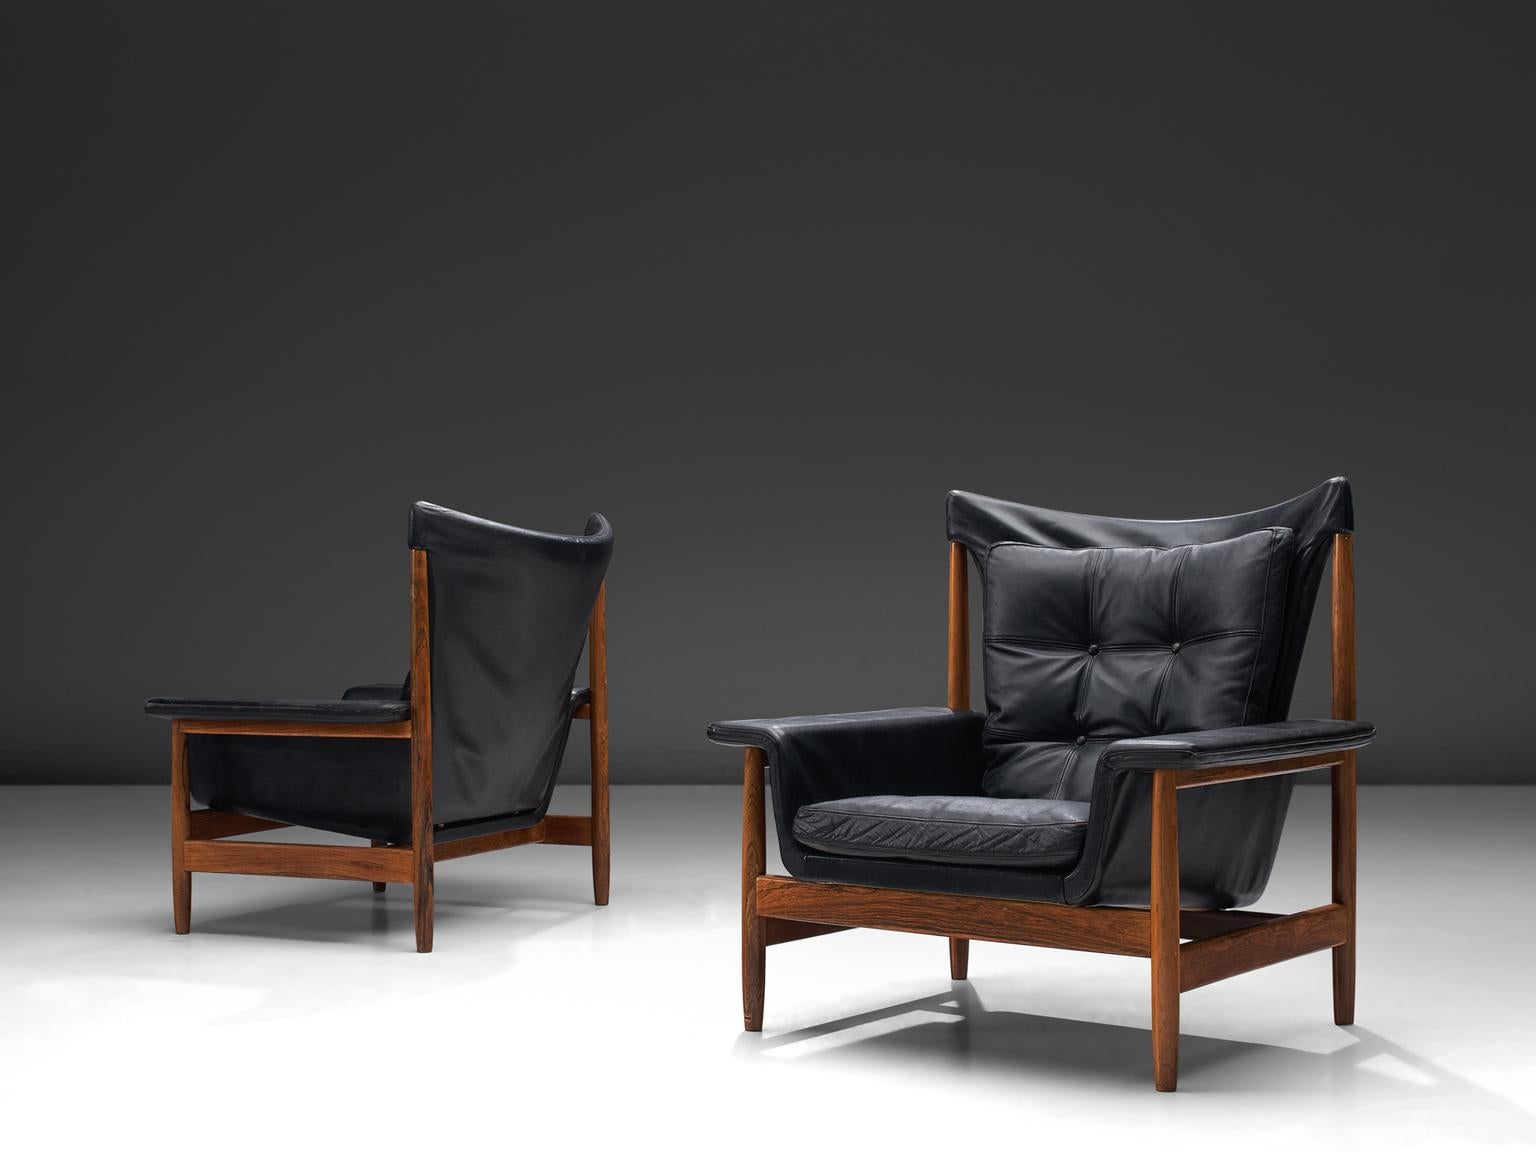 Illum Wikkelsø, pair of lounge chairs, black leather and rosewood, Denmark, 1960s.

This set of lounge chairs feature a rosewood, geometric frame. The back seat is hanging from the upper part of the frame. Also the seat is leaning on the frame, The